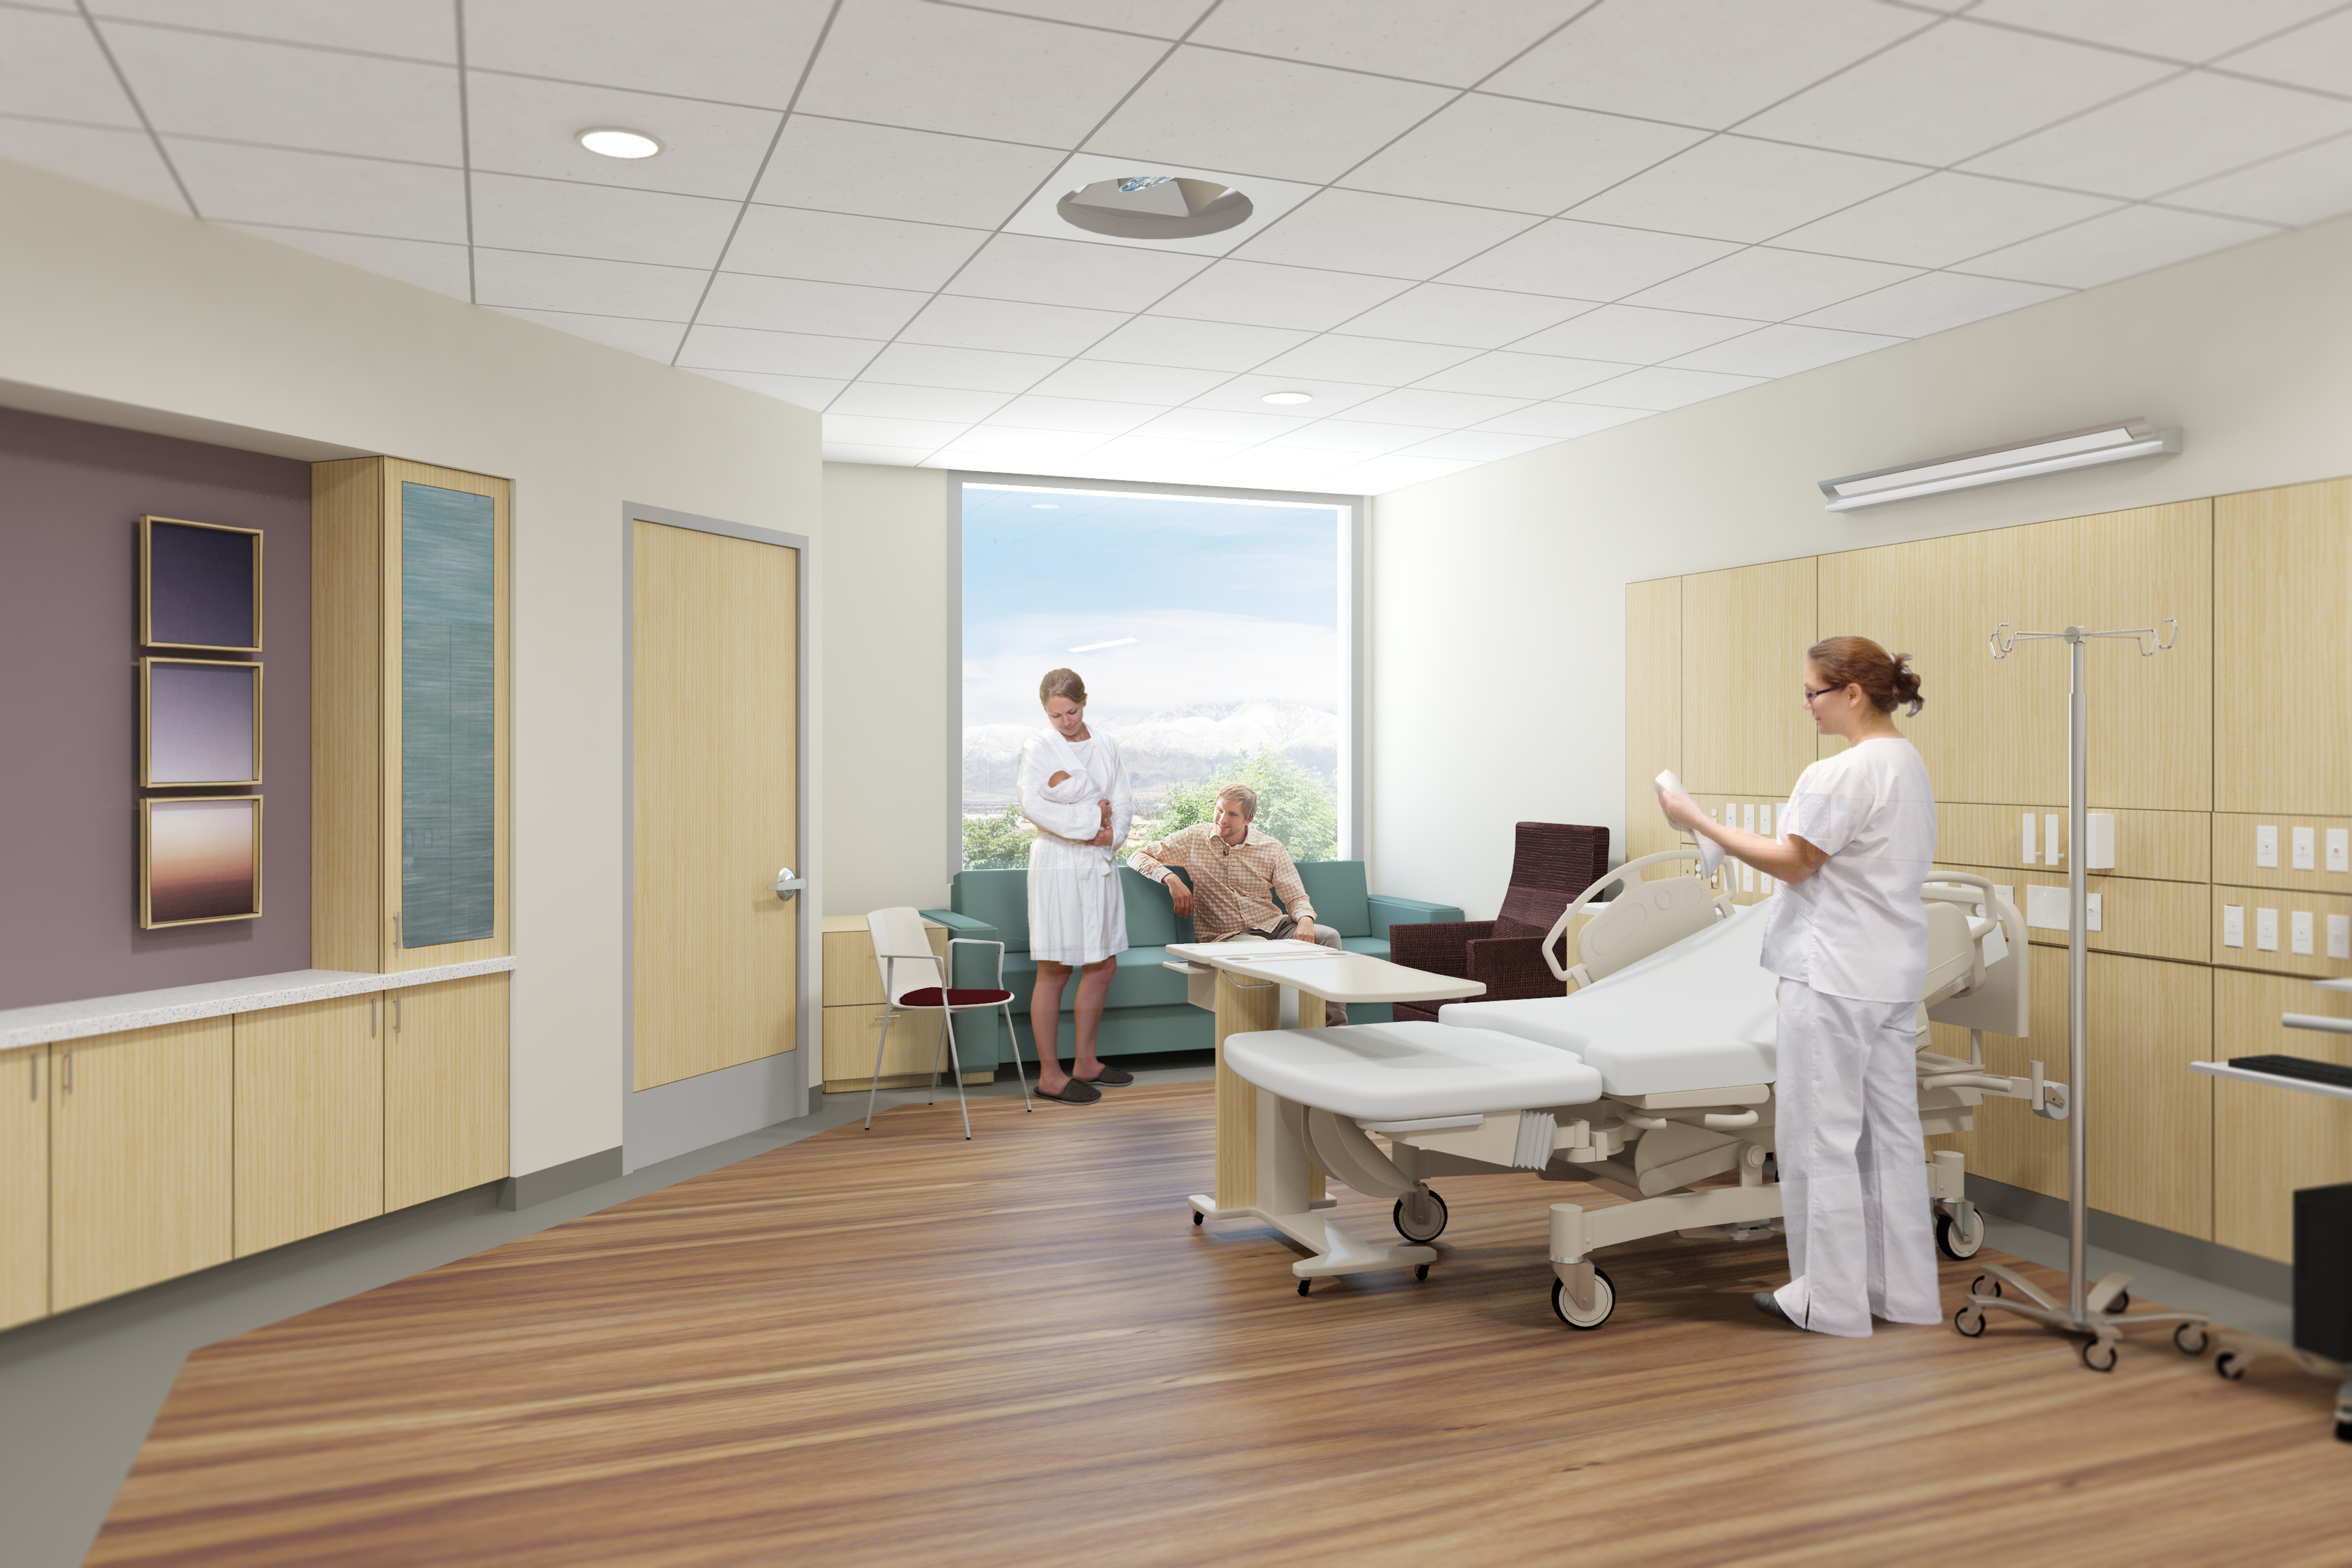 Hospital room design strategies use rightsizing to improve patient outcomes in the Henry Mayo Newhall Hospital Patient Tower.